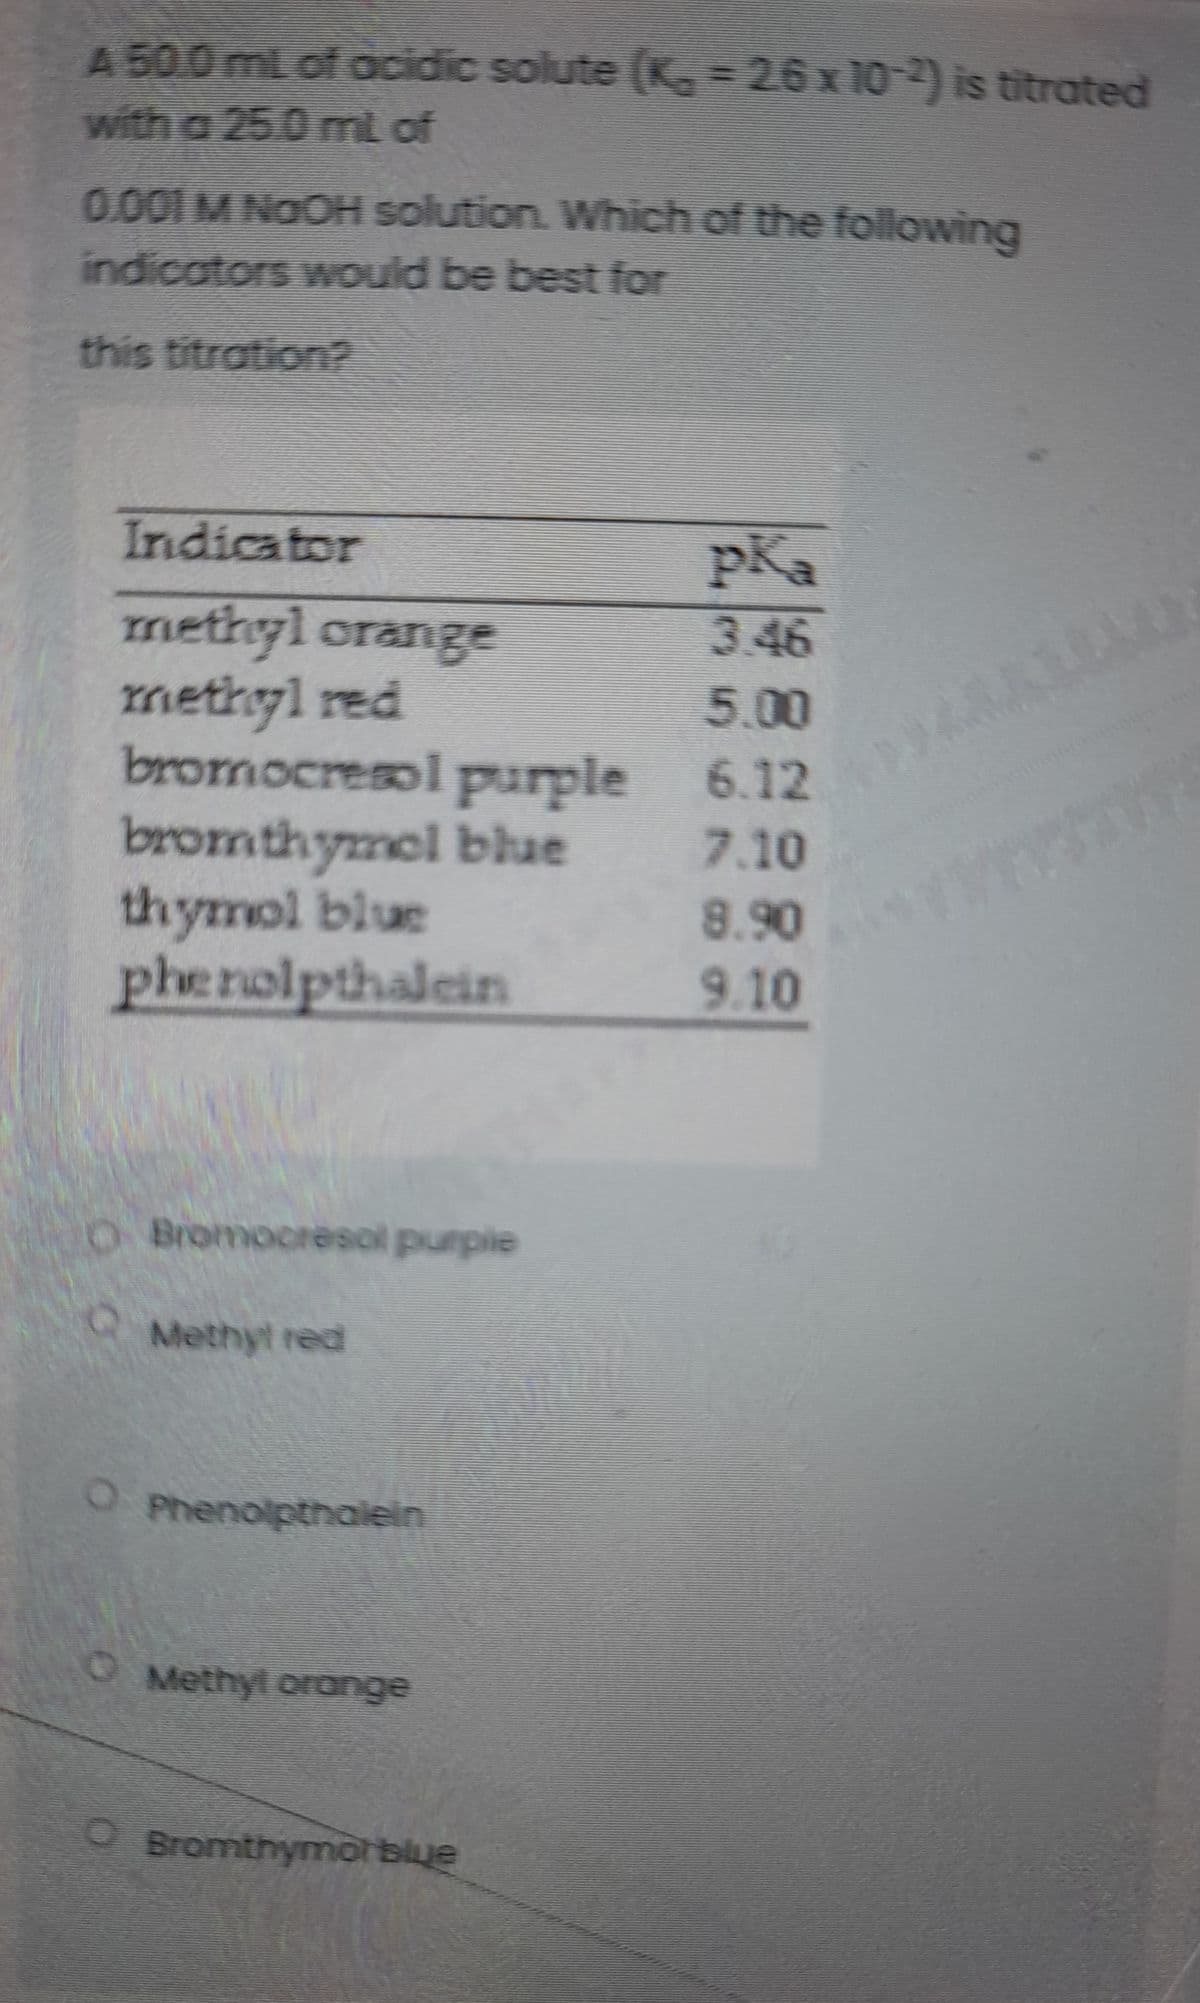 A 50.0mL of ocidic solute (K 2.6x 10-) is titrated
with a 25.0 mt of
0.001 M NO OH solution. Which of the following
indicators would be best for
this titration?
Indicator
pKa
methyl orange
methyl red
bromocresol purple 6.12
bromthymel blue
thymol blue
phenolpthalein
3.46
5.00
7.10
8.90
9.10
OBromocresol purple
Methyt red
OPhenolpthalein
OMethyl orange
O Bromthymor blue
